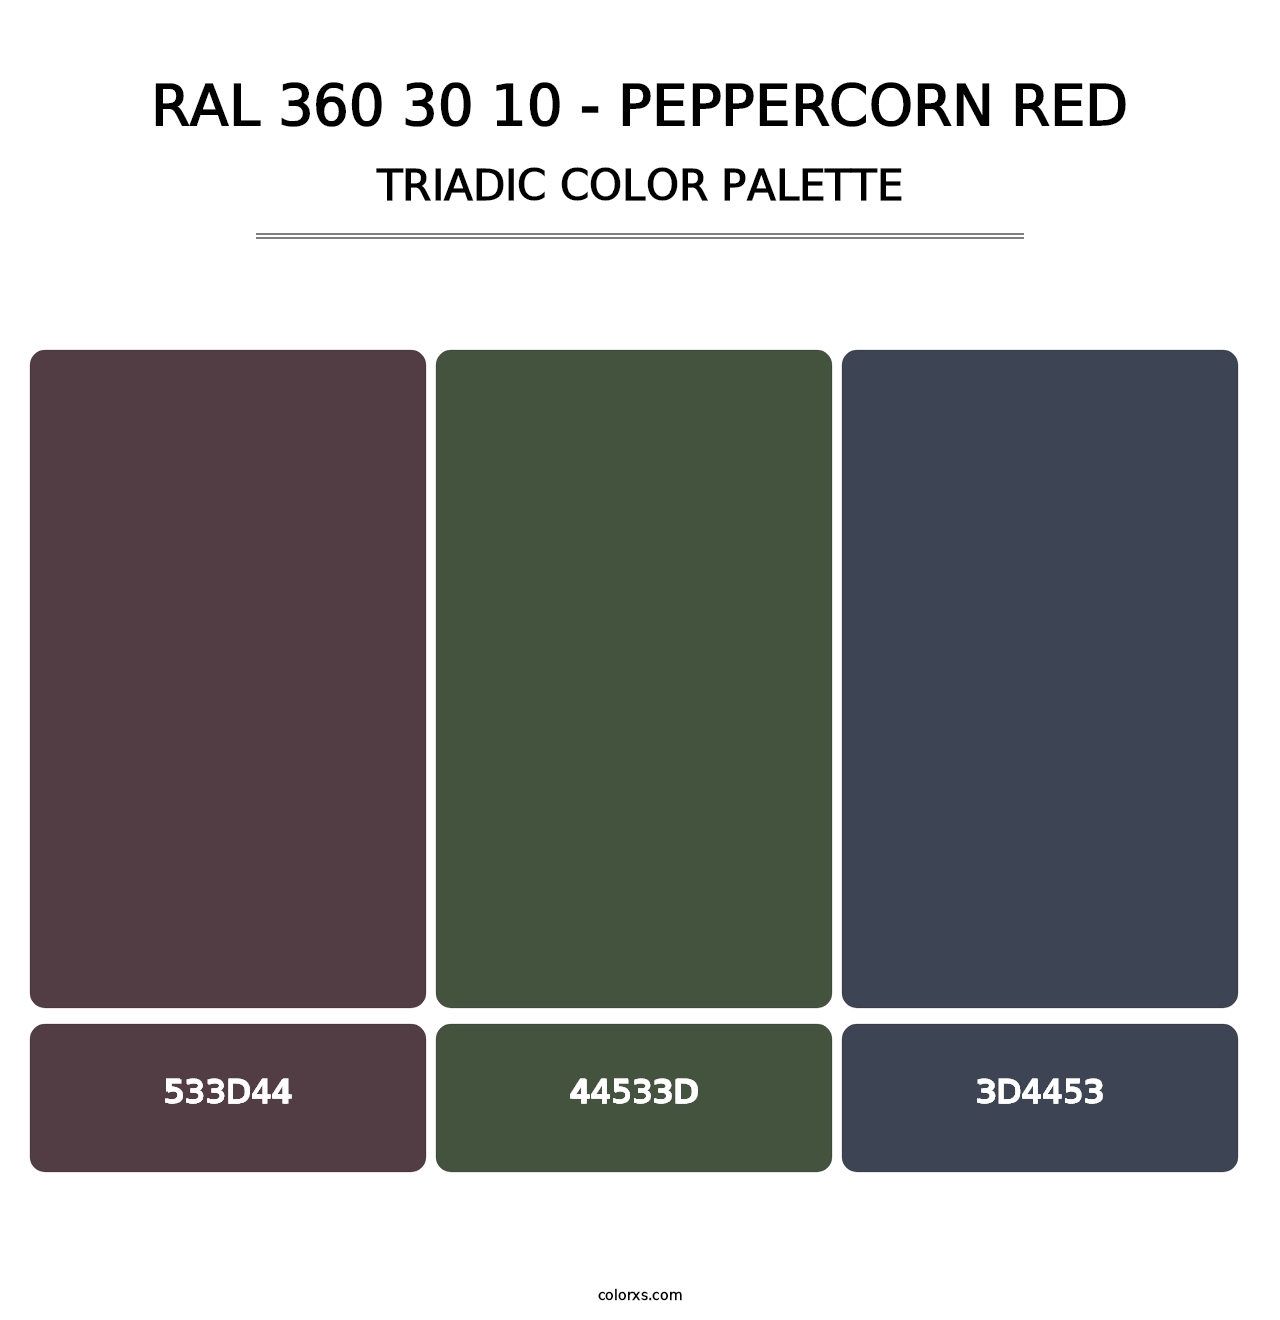 RAL 360 30 10 - Peppercorn Red - Triadic Color Palette